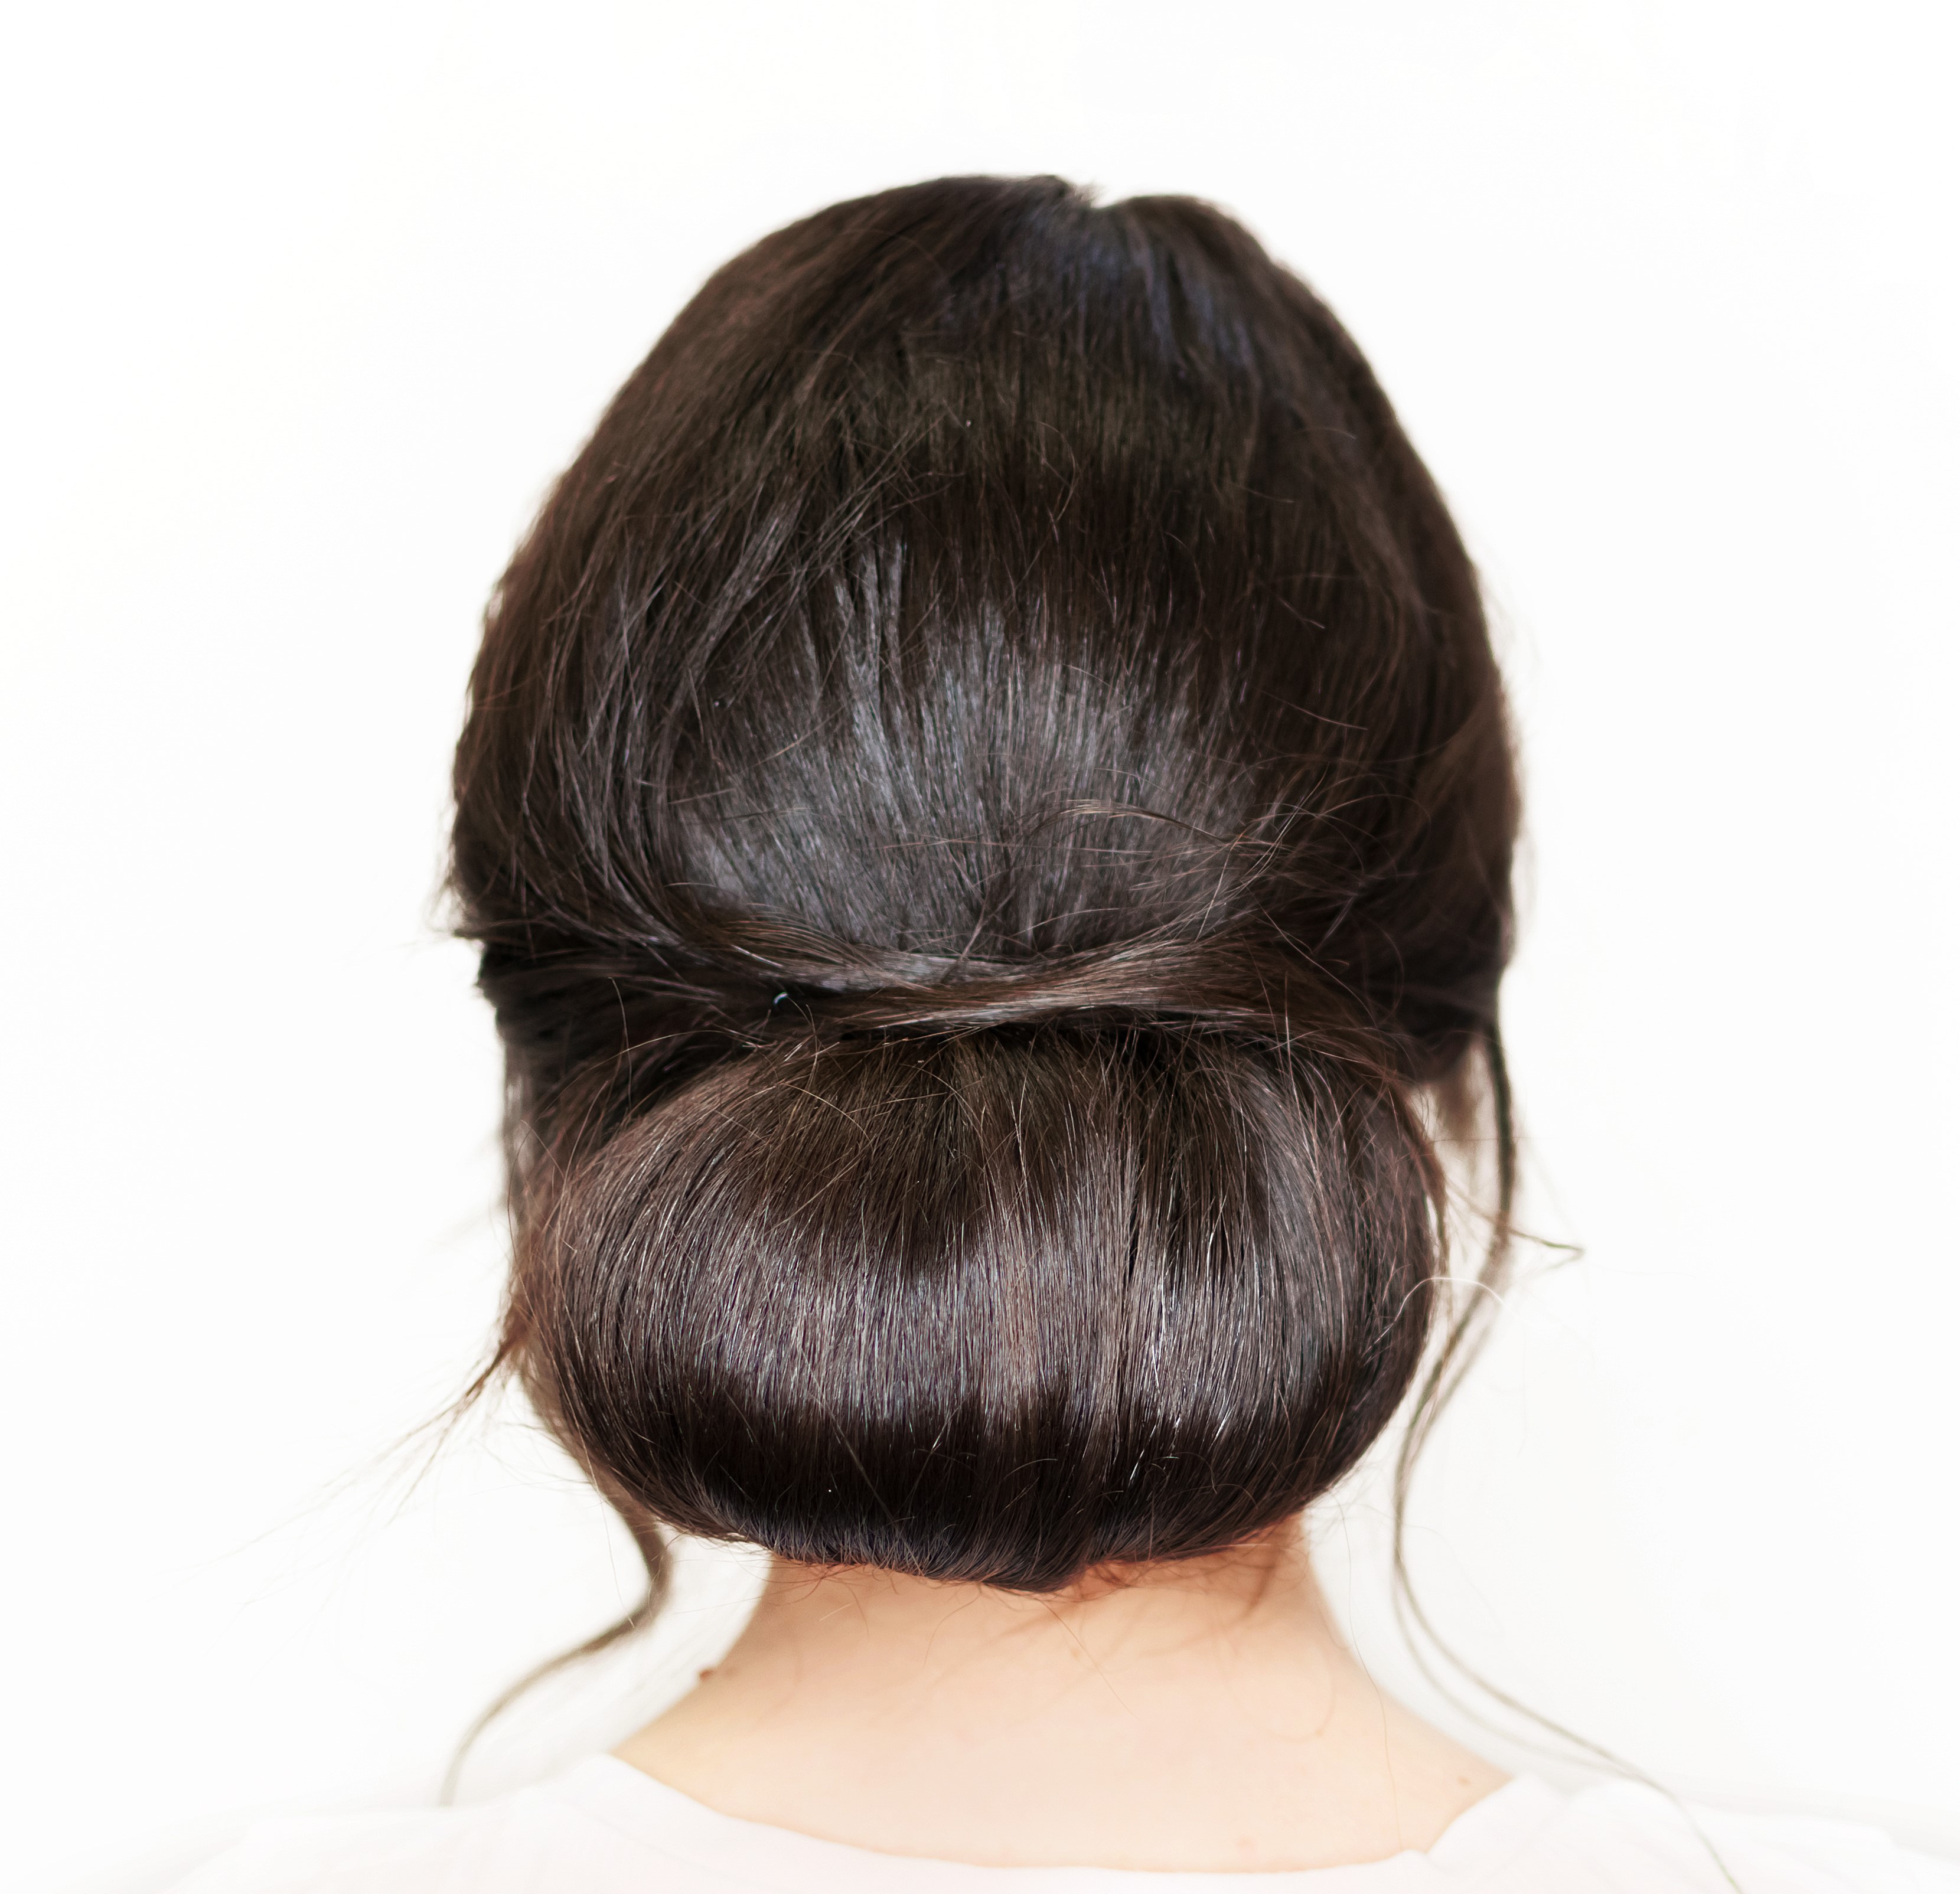 12 Bun Hairstyles for Work - Stylish Life for Moms